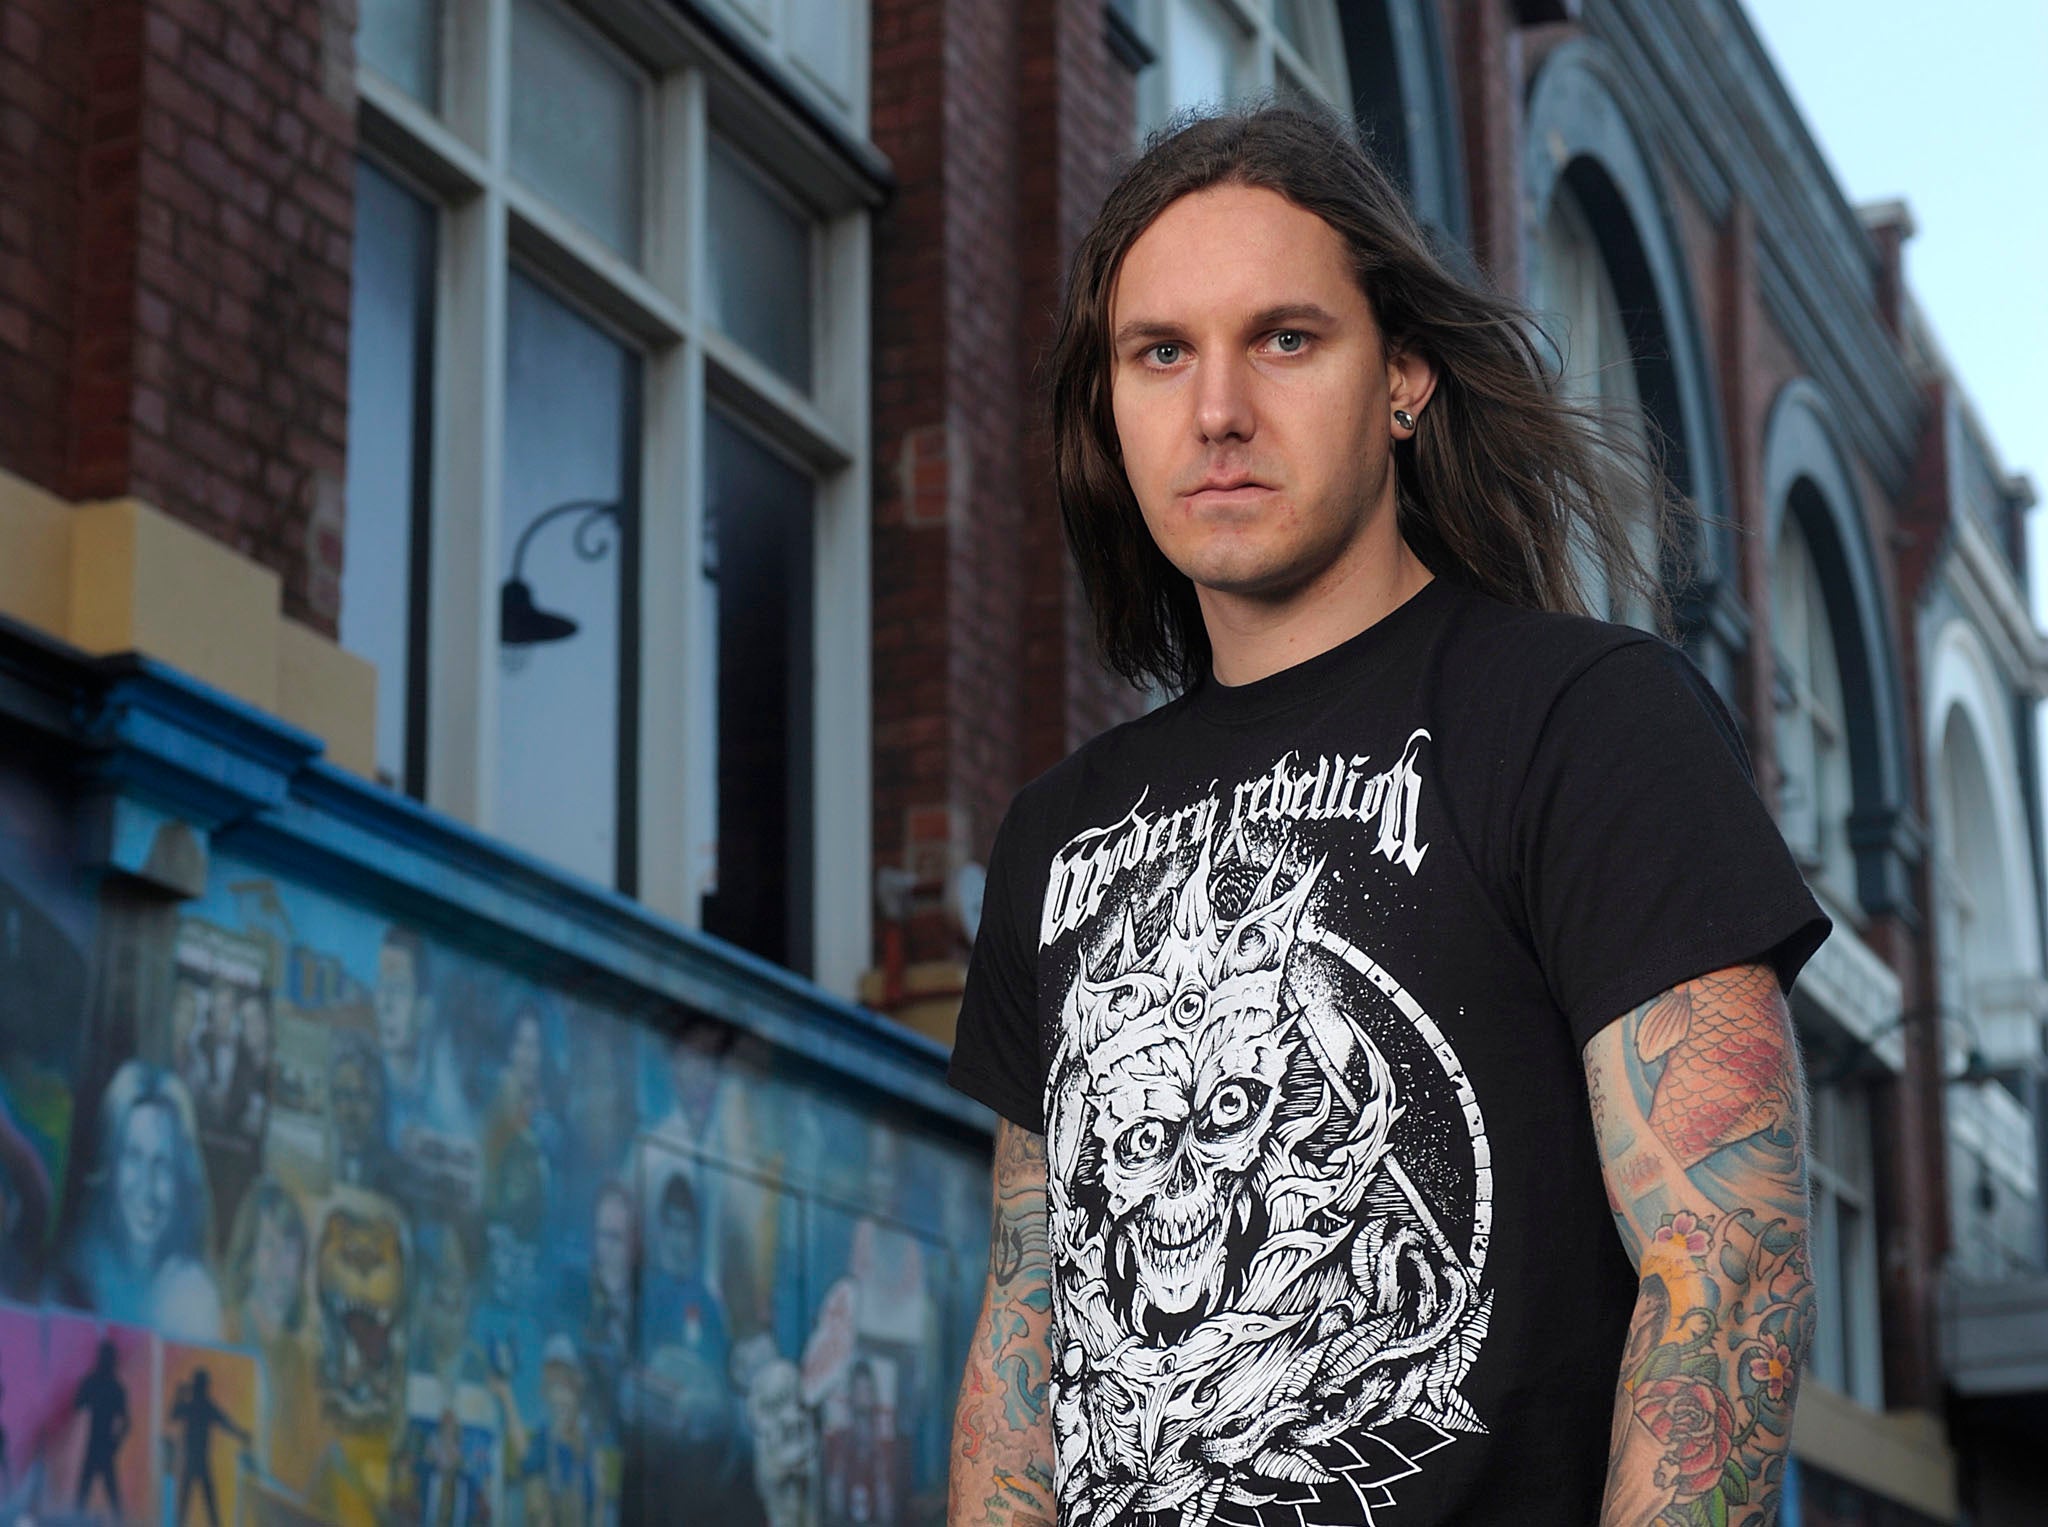 Lambesis filed for divorce from his wife Meggan – with whom he shares three adopted Ethiopian children – in 2012